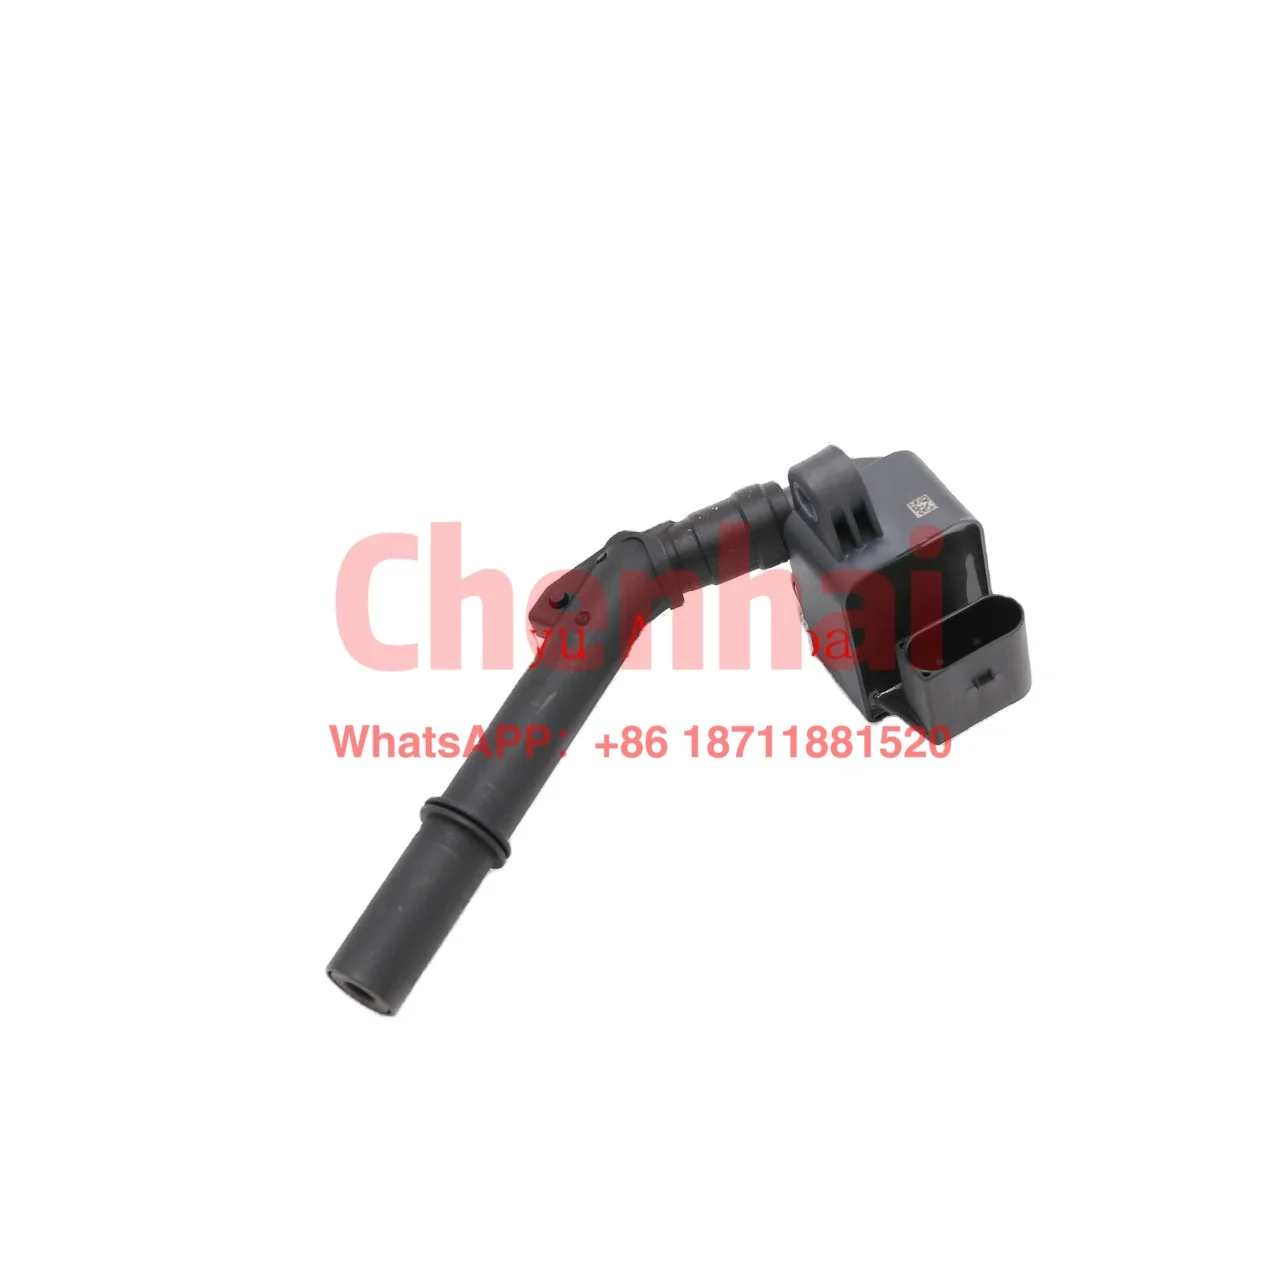 Factory Wholesale A2649061200 A2649060200 2649061200 2649060200 GLB250 GLB2020 Engine Ignition Coil For 1